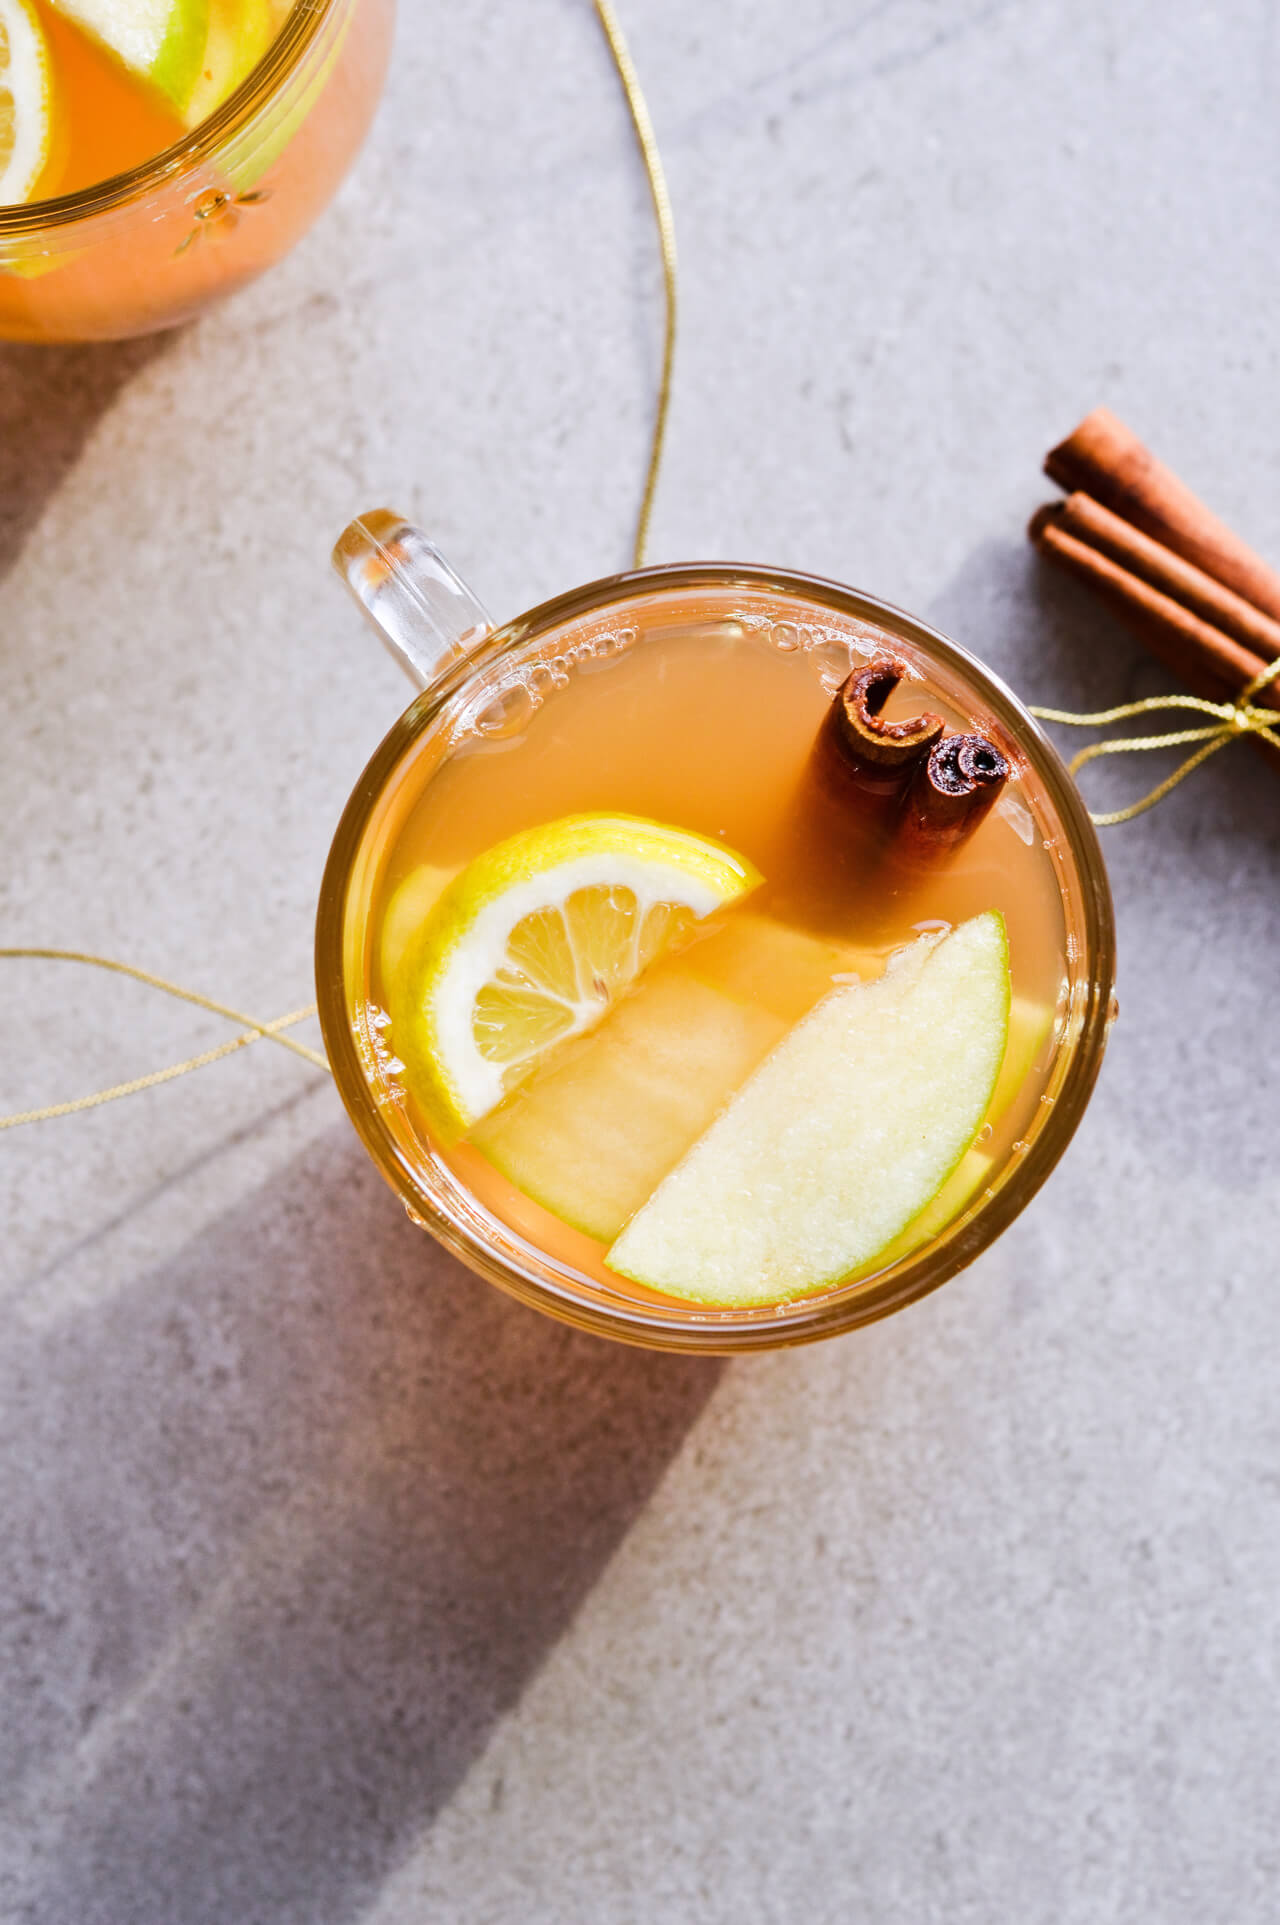 Apple mulled white wine offers a new twist on and old classic! The perfect winter drink, it's a warm mix of wine, apples and cinnamon. Great for gatherings, holiday parties or quiet weekends at home. Done in under 30 minutes! | @mitzyathome